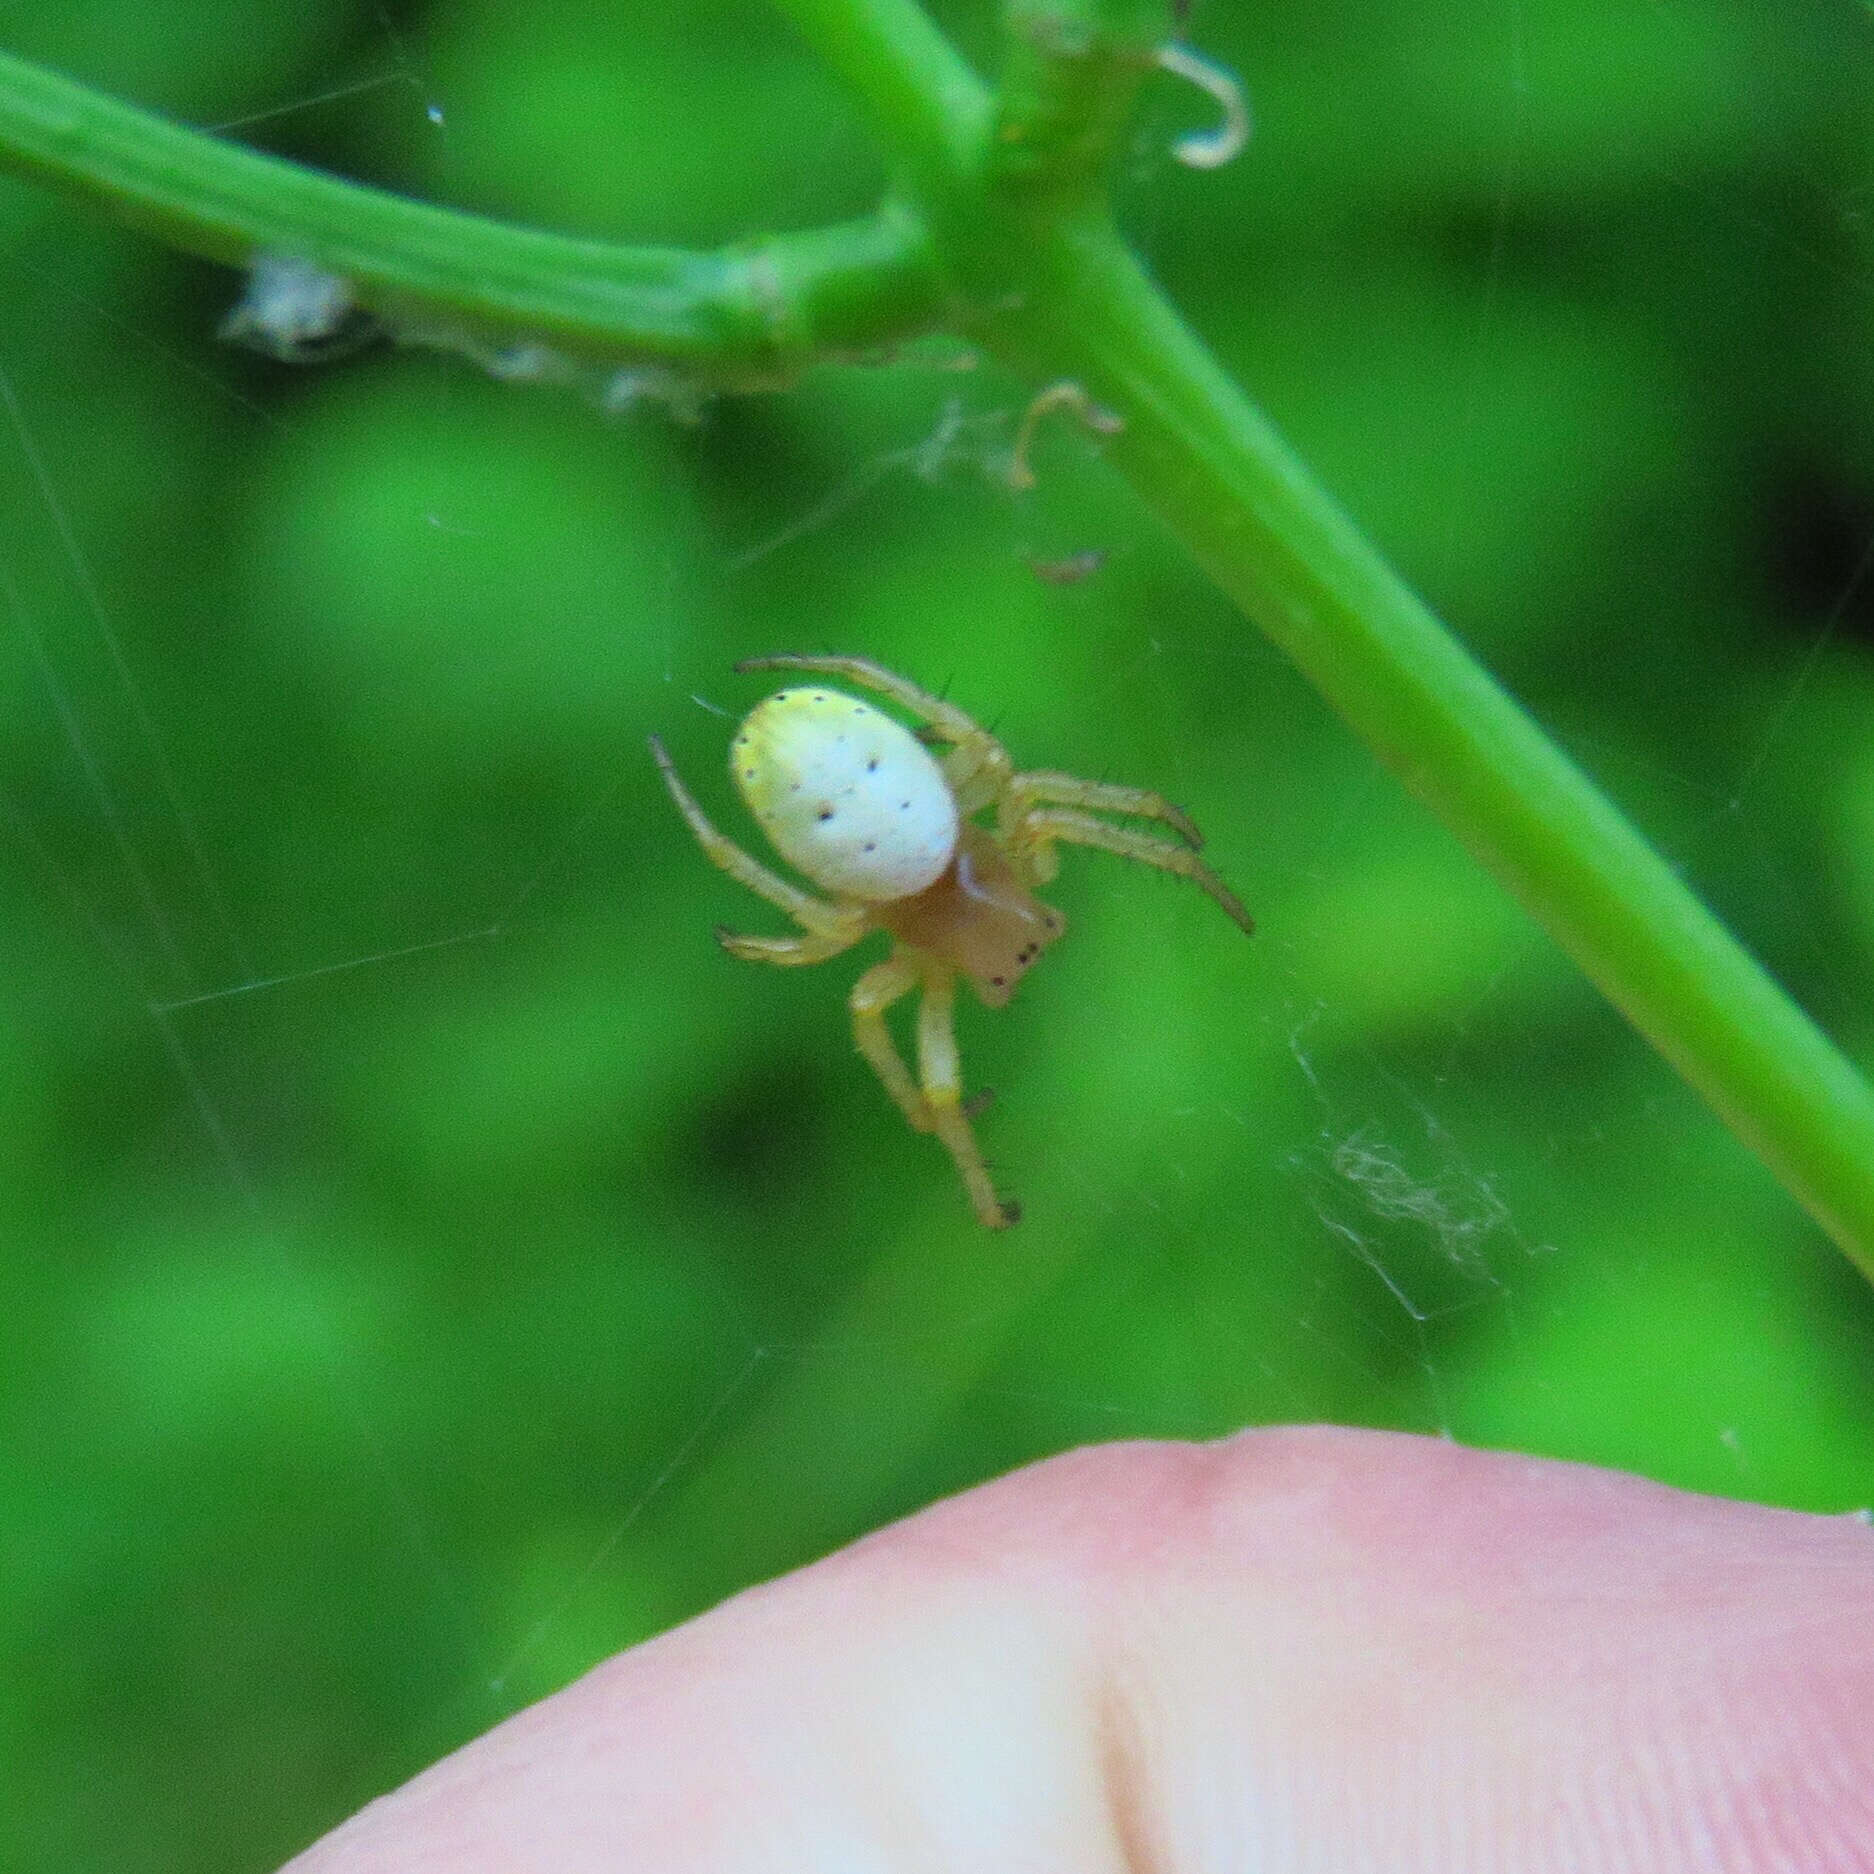 Image of Six-spotted Yellow Orbweaver